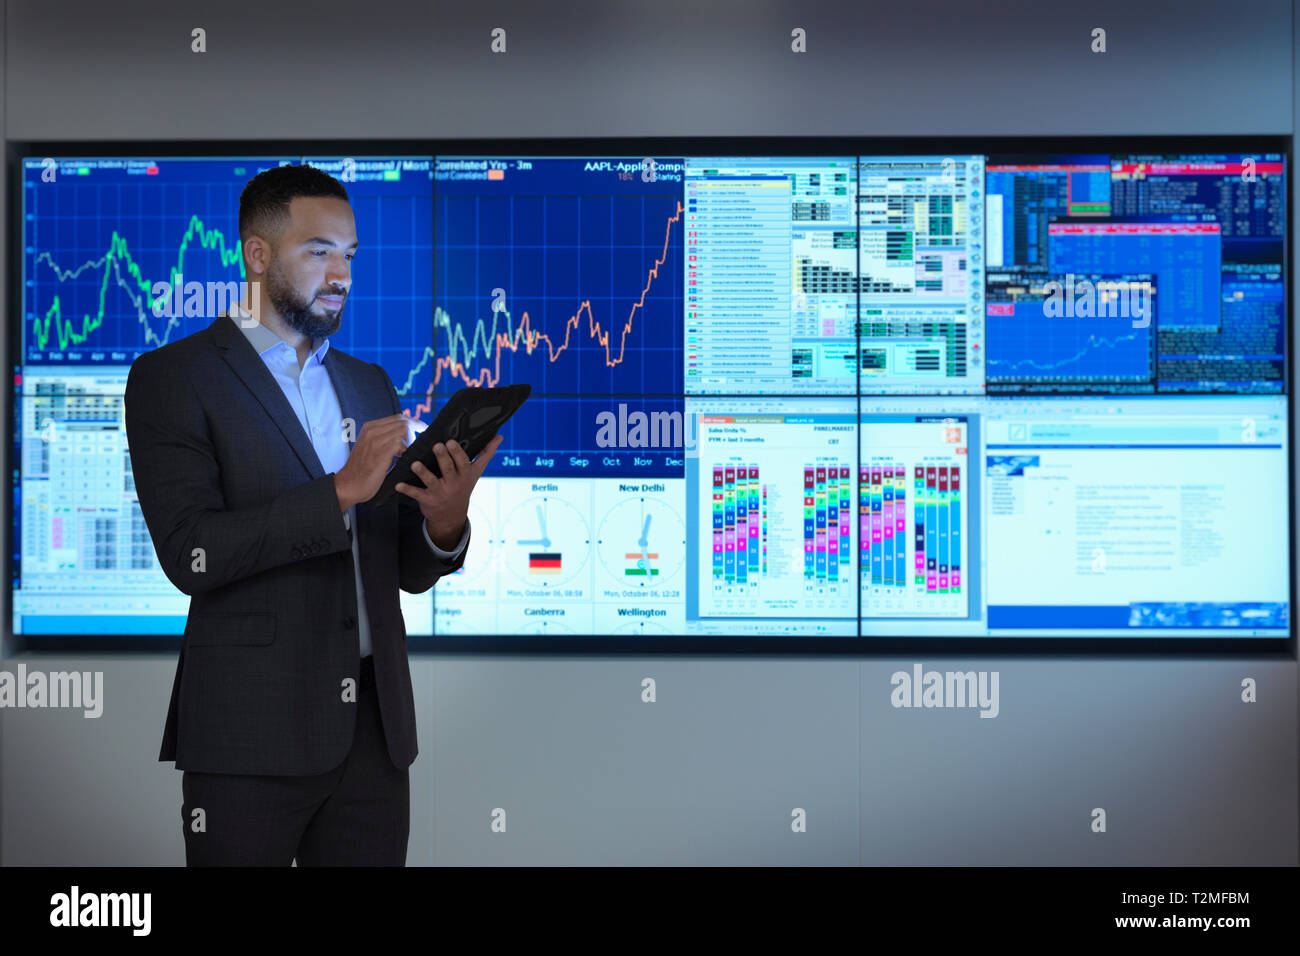 Composite image of businessman using digital tablet in front of digital charts Stock Photo